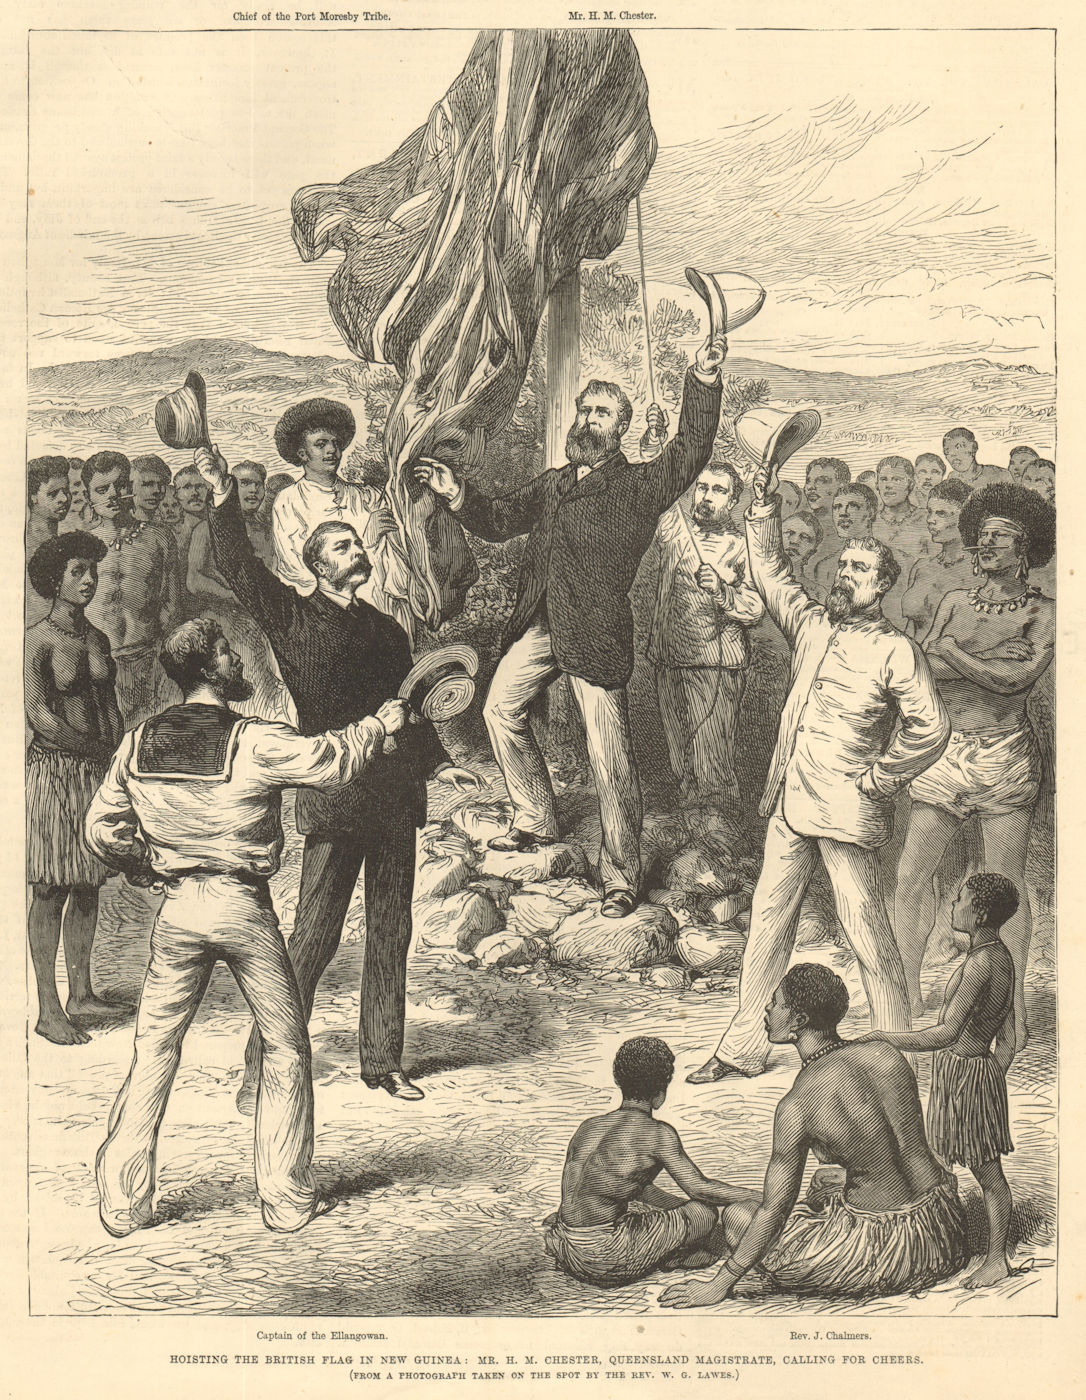 Hoisting the British flag in New Guinea. Chester, Queensland Magistrate 1883